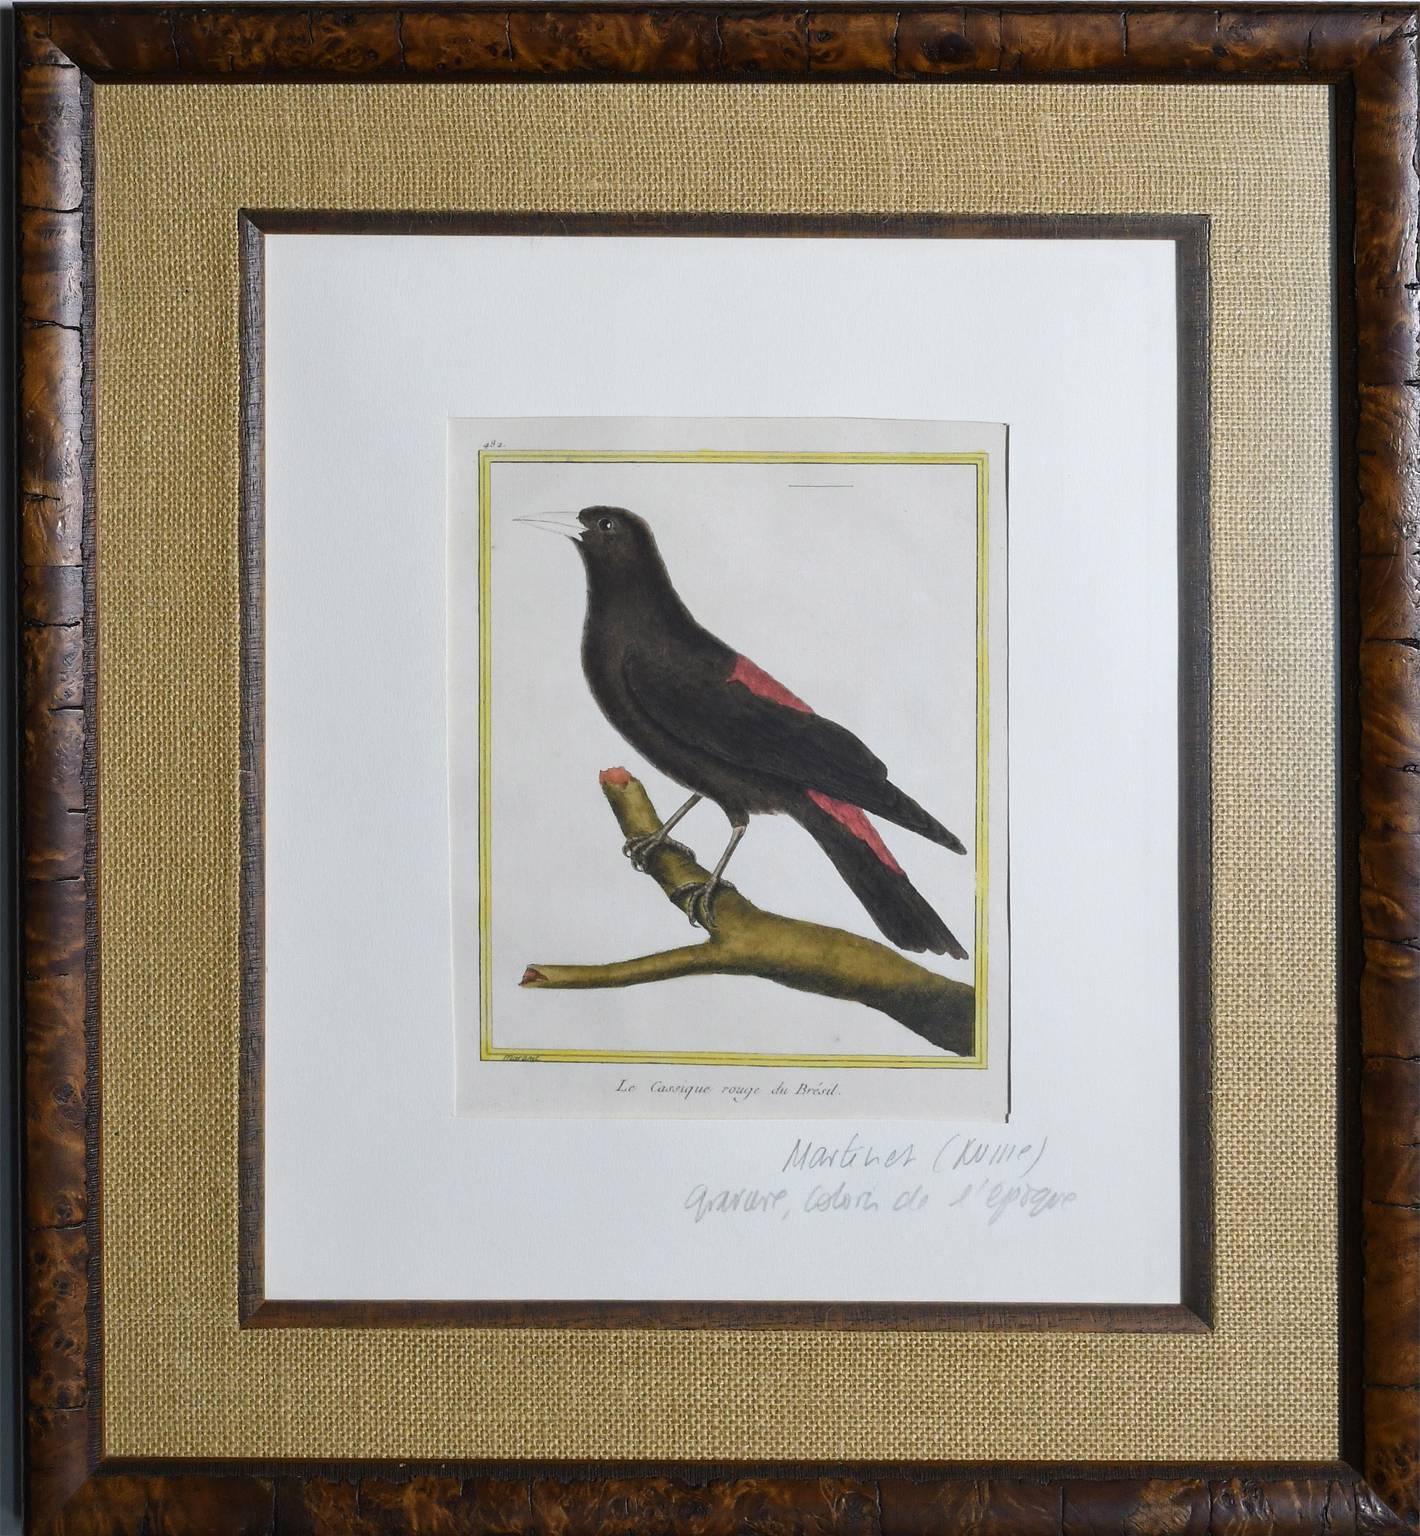 A set of eight framed and matted original, hand-colored bird engravings on paper by French engraver Francois Nicolas Martinet from 1770-1786. Each engraving identifies in French the bird depicted, and is beautifully framed in burled walnut with